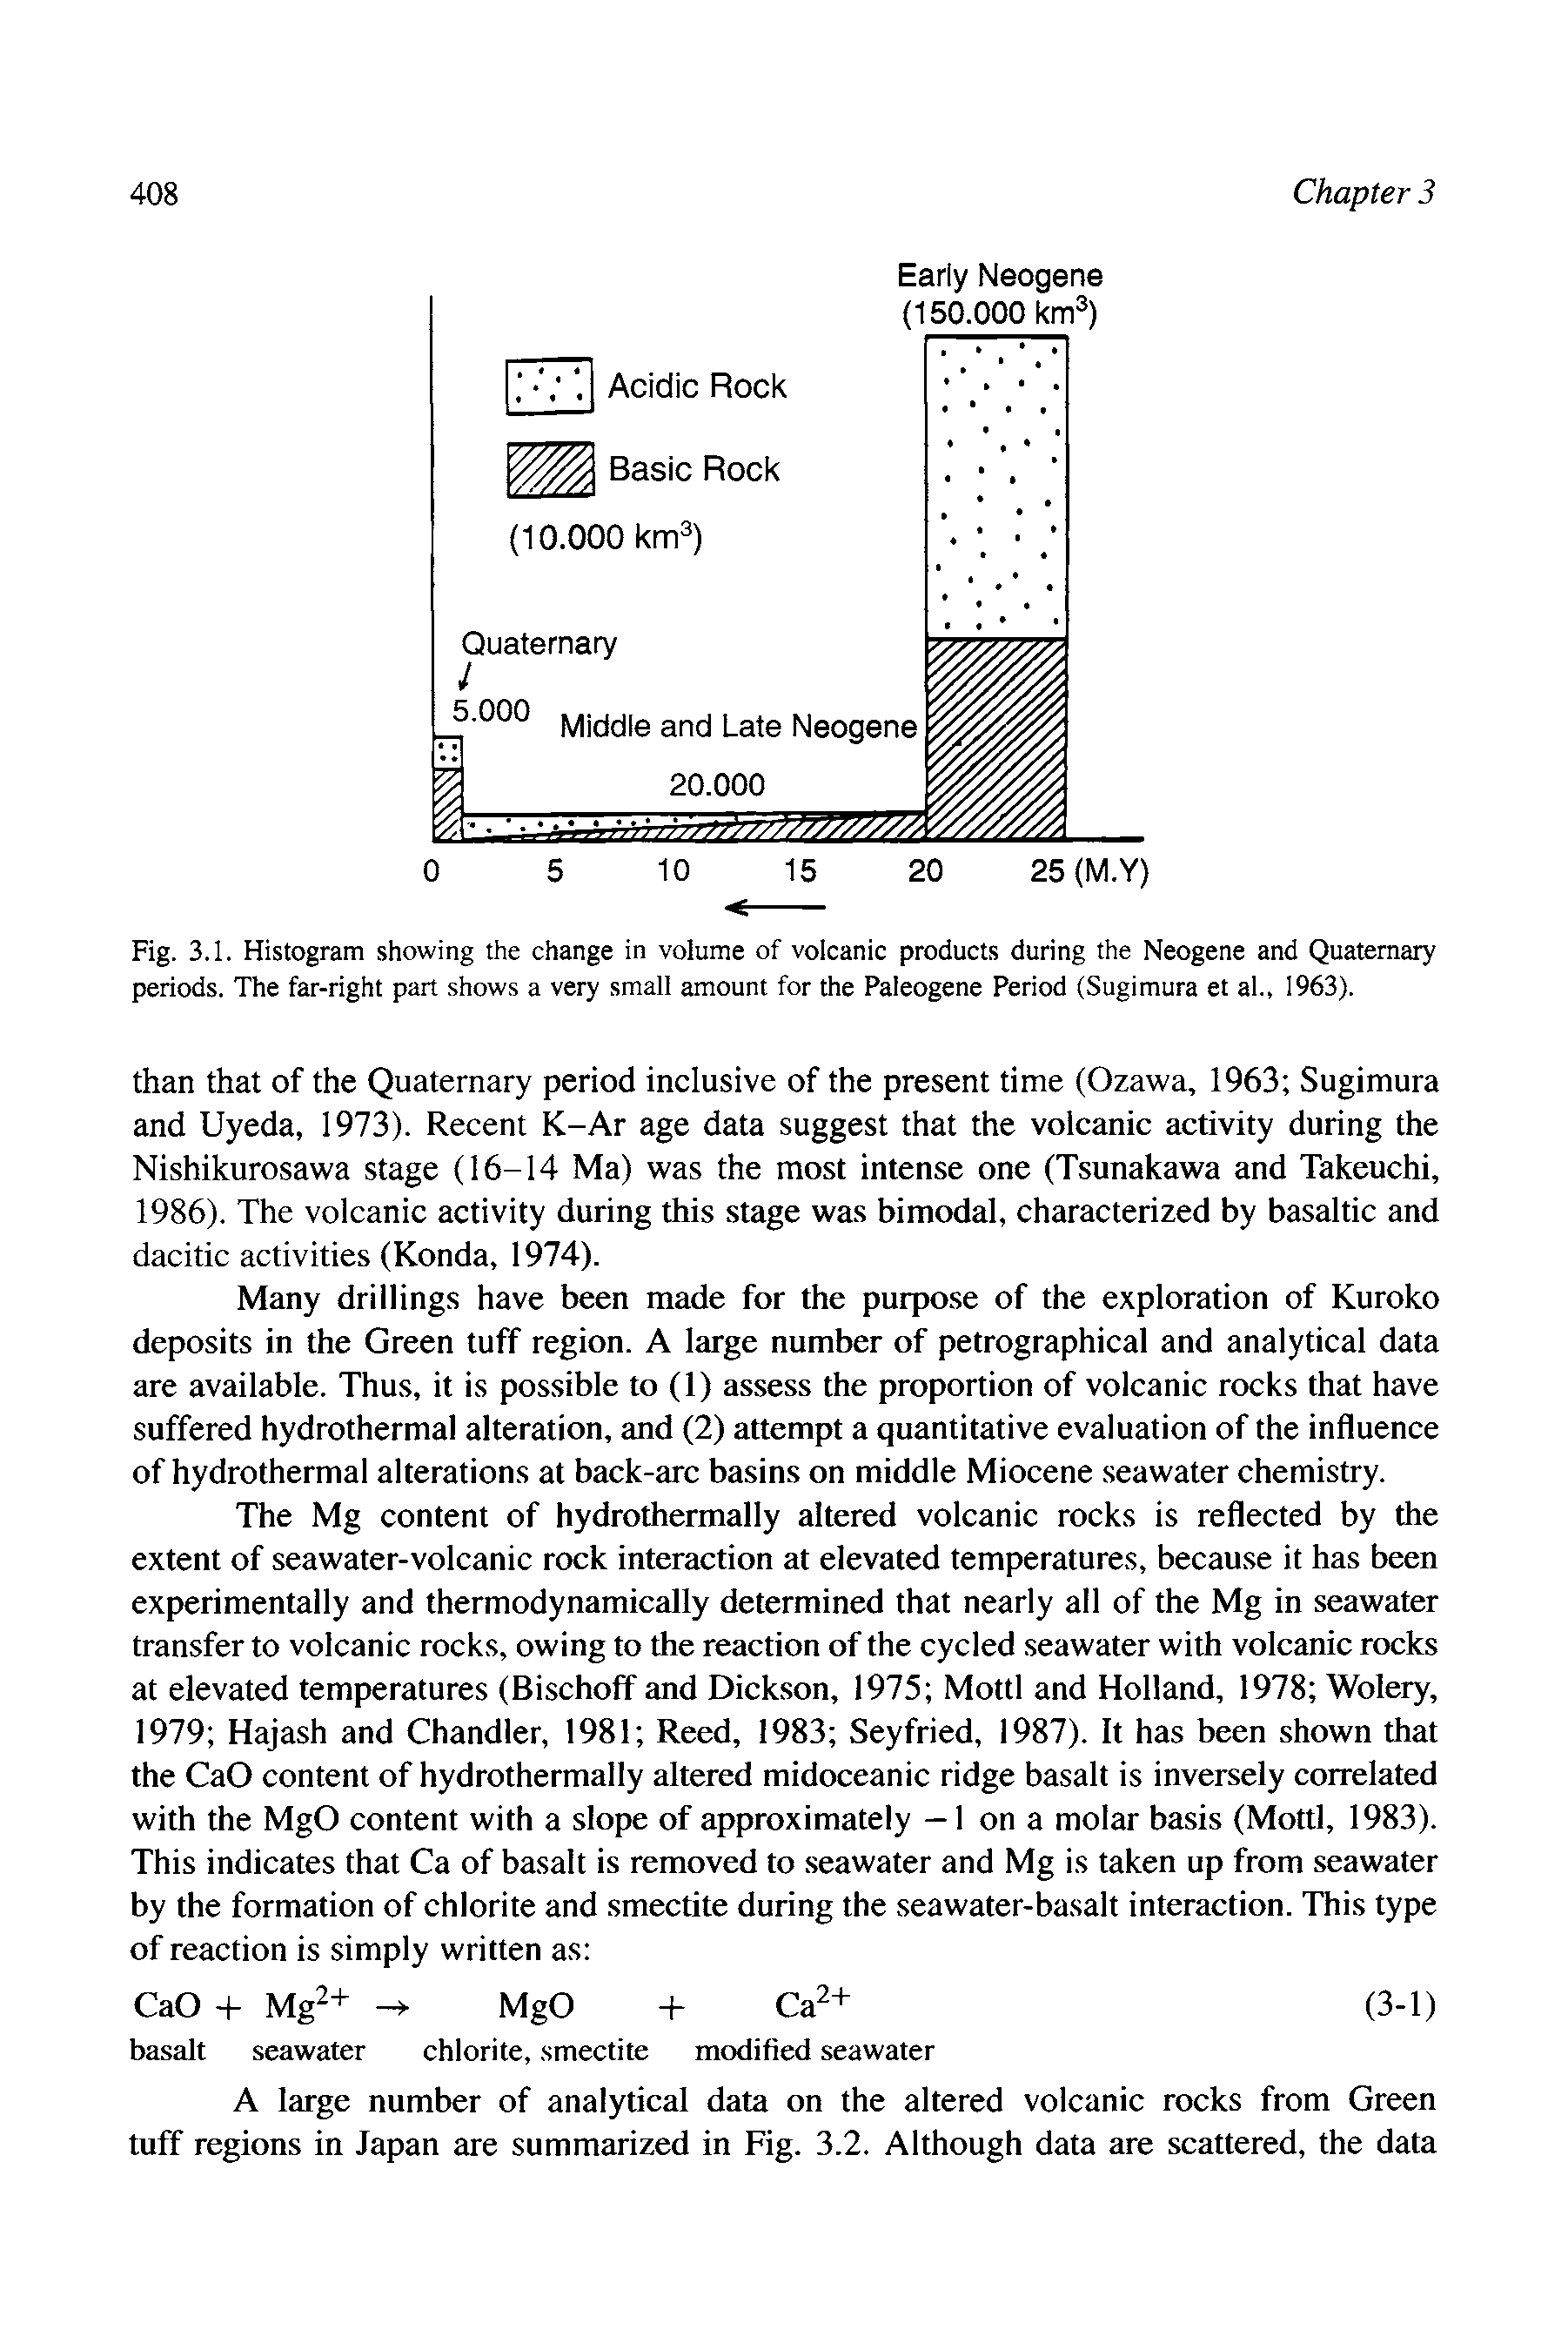 Fig. 3.1. Histogram showing the change in volume of volcanic products during the Neogene and Quaternary periods. The far-right part shows a very small amount for the Paleogene Period (Sugimura et al., 1963).